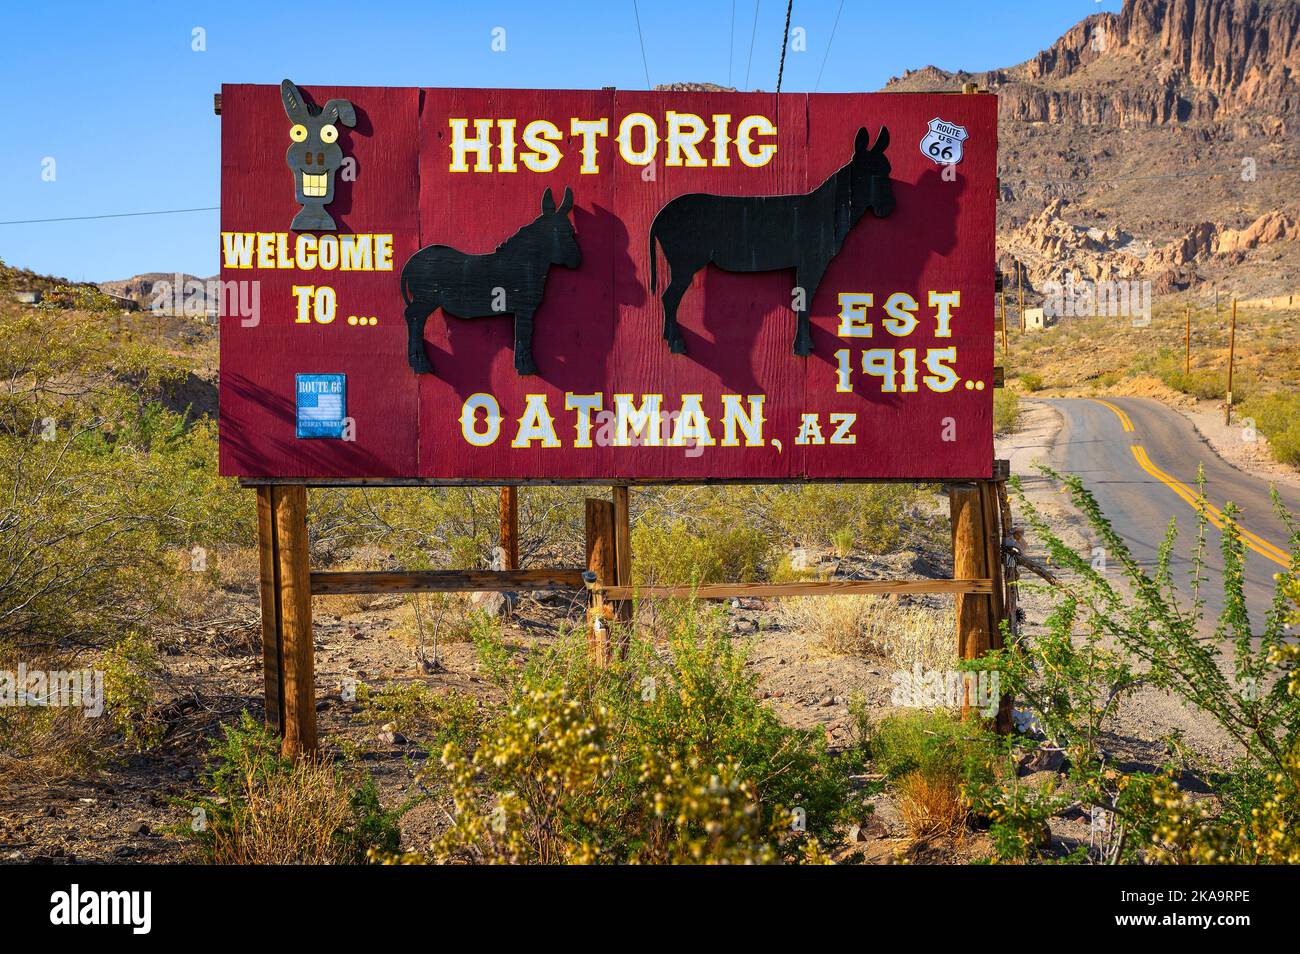 Entry sign at Oatman village on historic Route 66 in Arizona Stock Photo